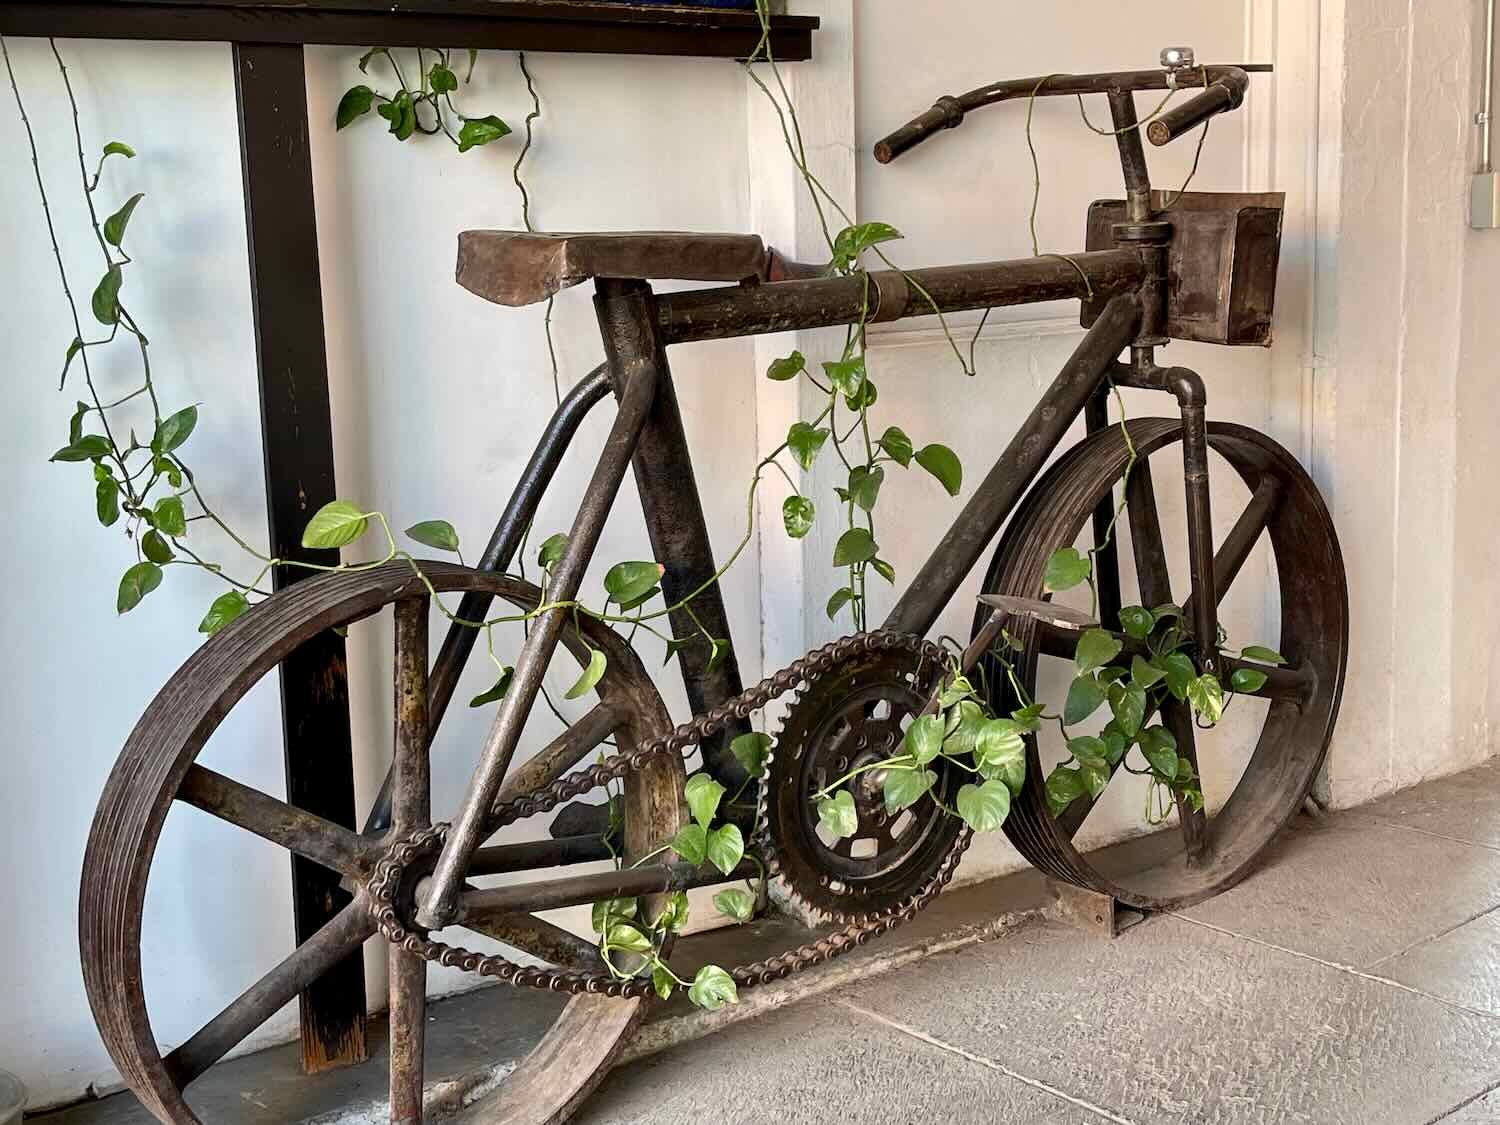 Bike art seen at the entrance to a cafe